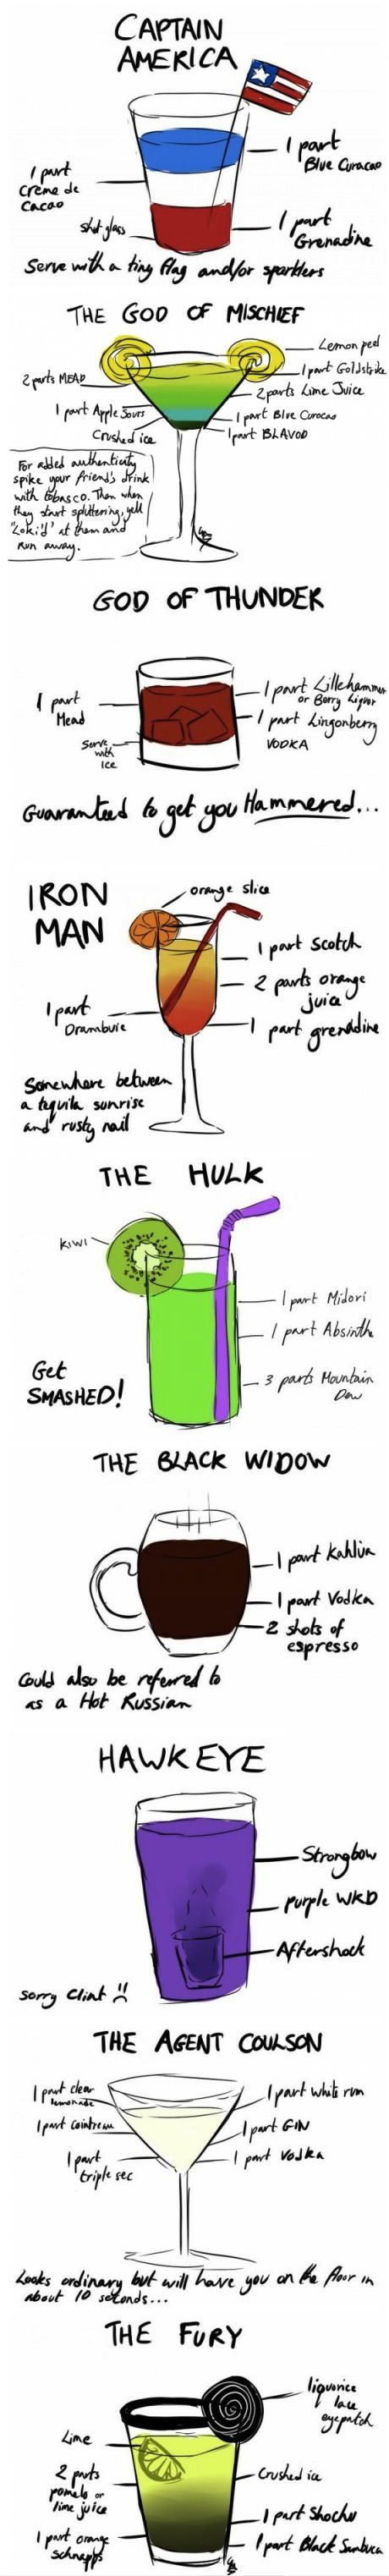 Avengers Mixed Drinks